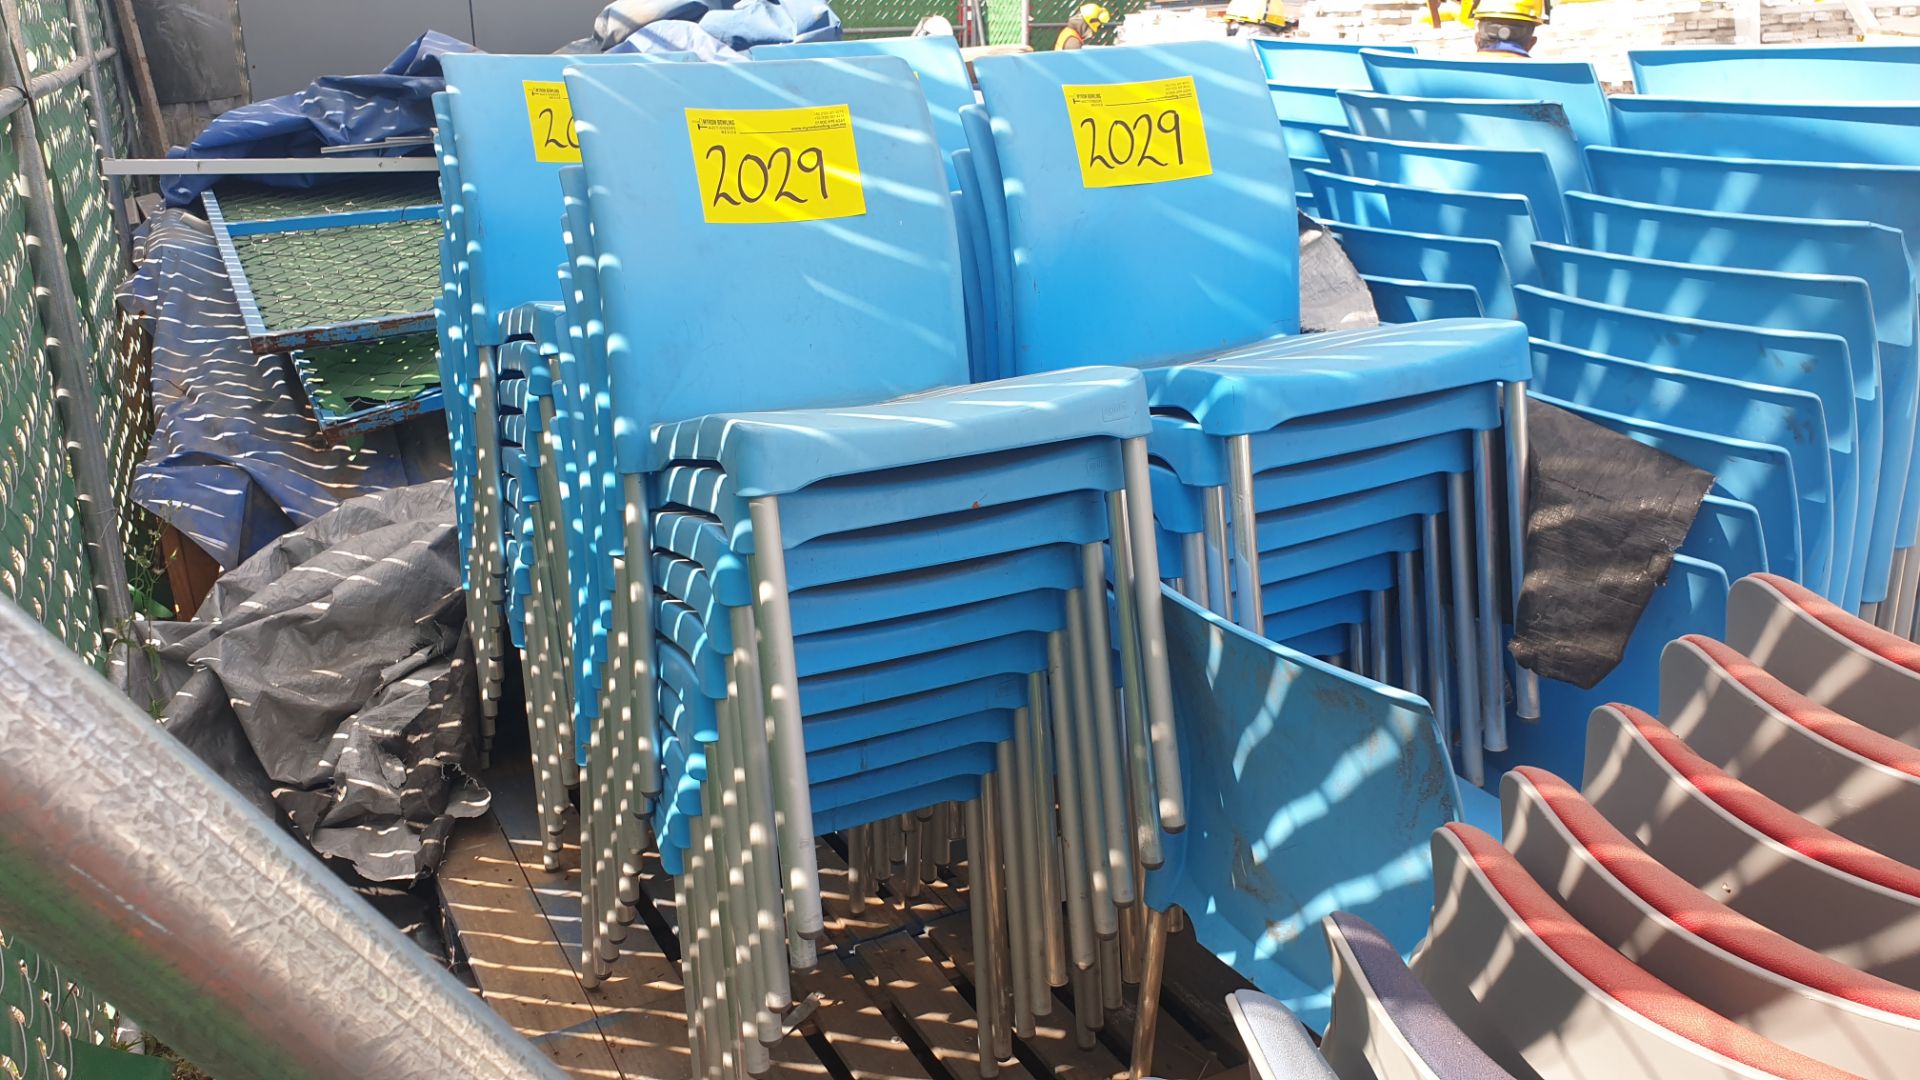 1 Lote of 40 blue plastic chairs, 7 metal chairs for office with backrest and upholstered seat - Bild 13 aus 22